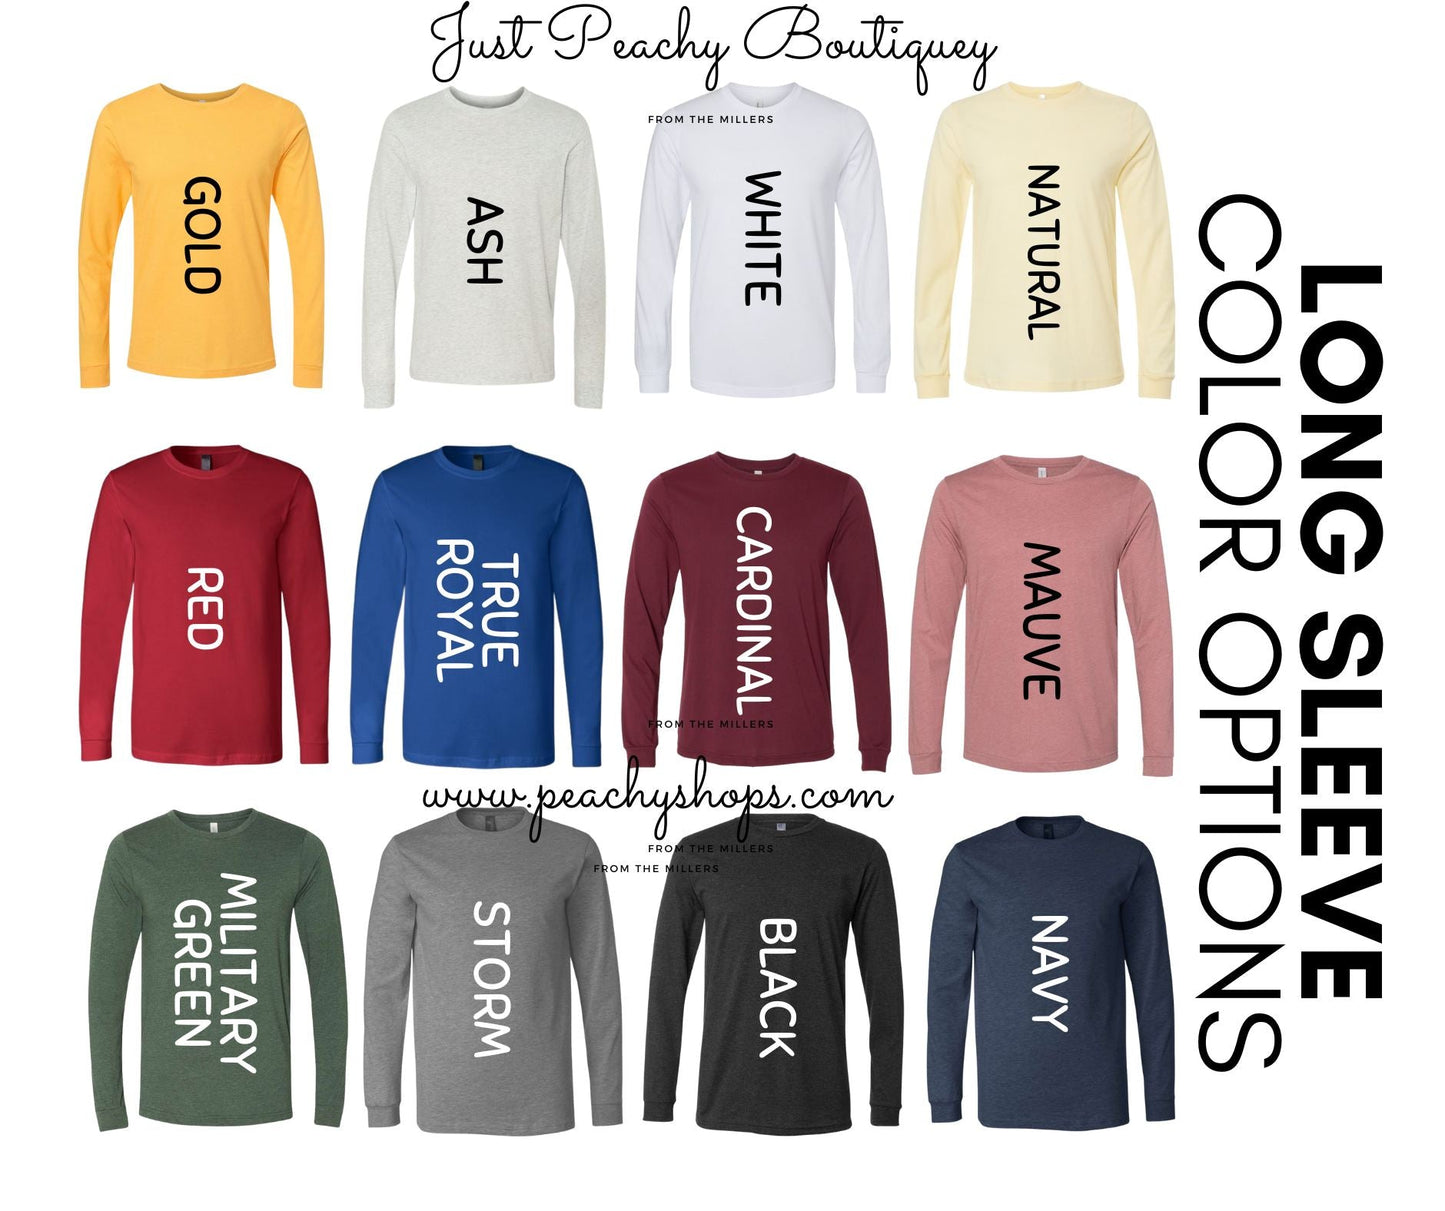 CITY OF LIGHT T-SHIRT OR PICK FROM 200 COLOR & STYLE OPTIONS! - TAT 4-7 DAYS